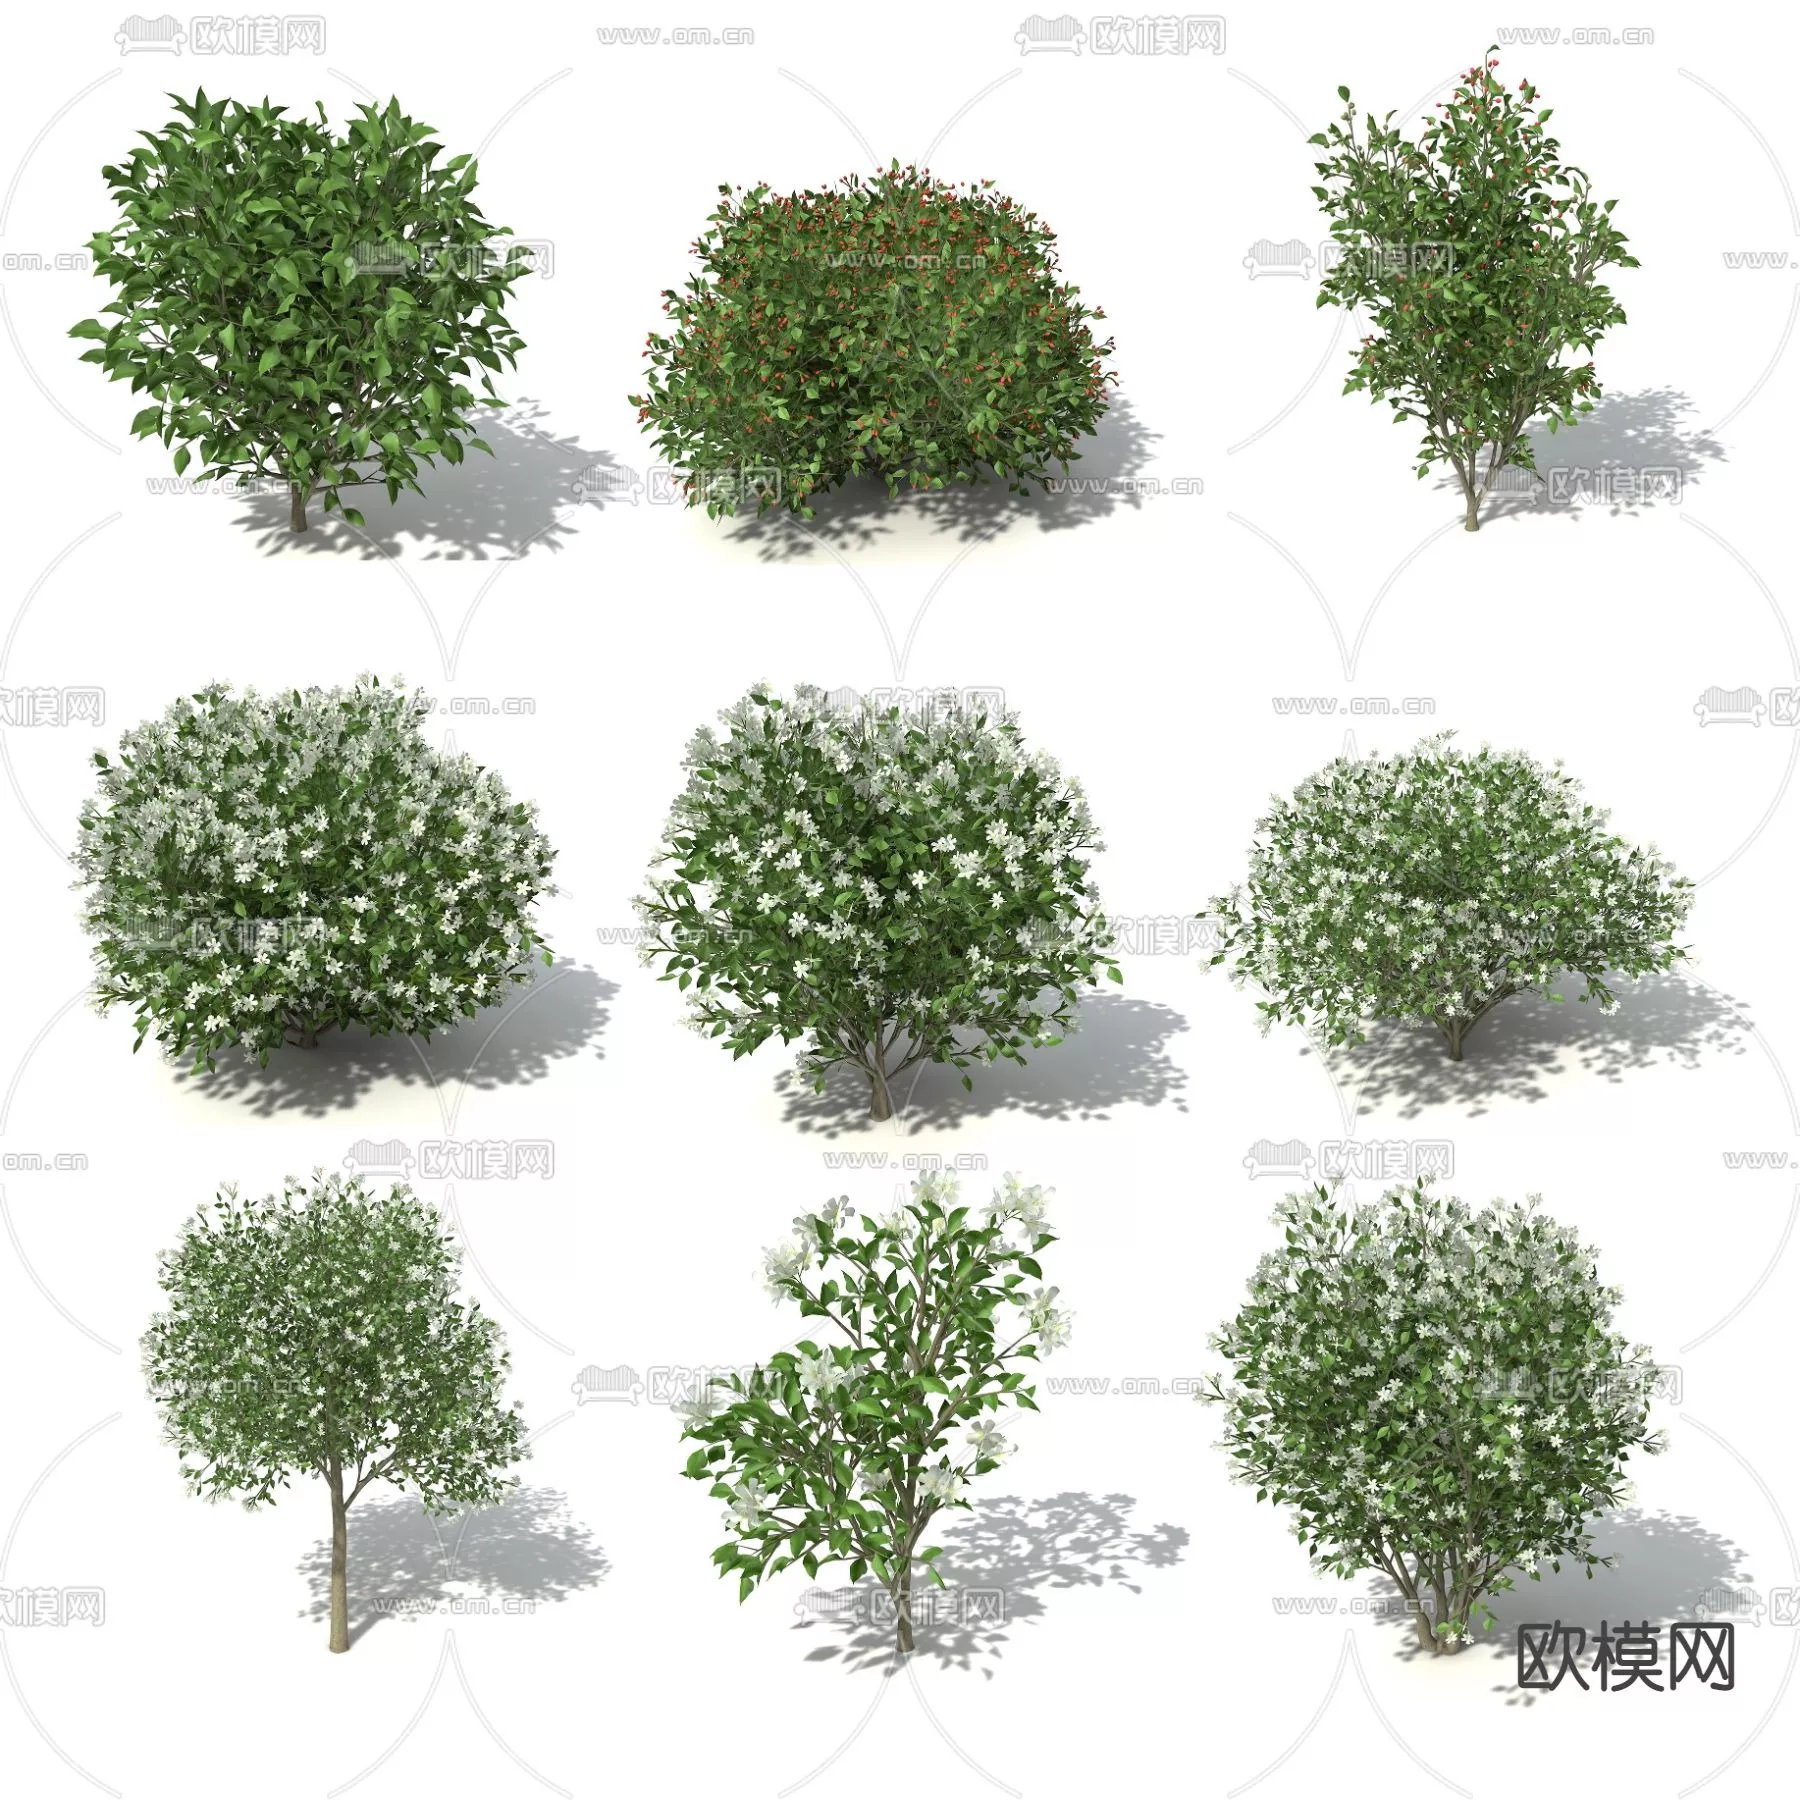 MODERN TREE - SKETCHUP 3D MODEL - VRAY OR ENSCAPE - ID15350